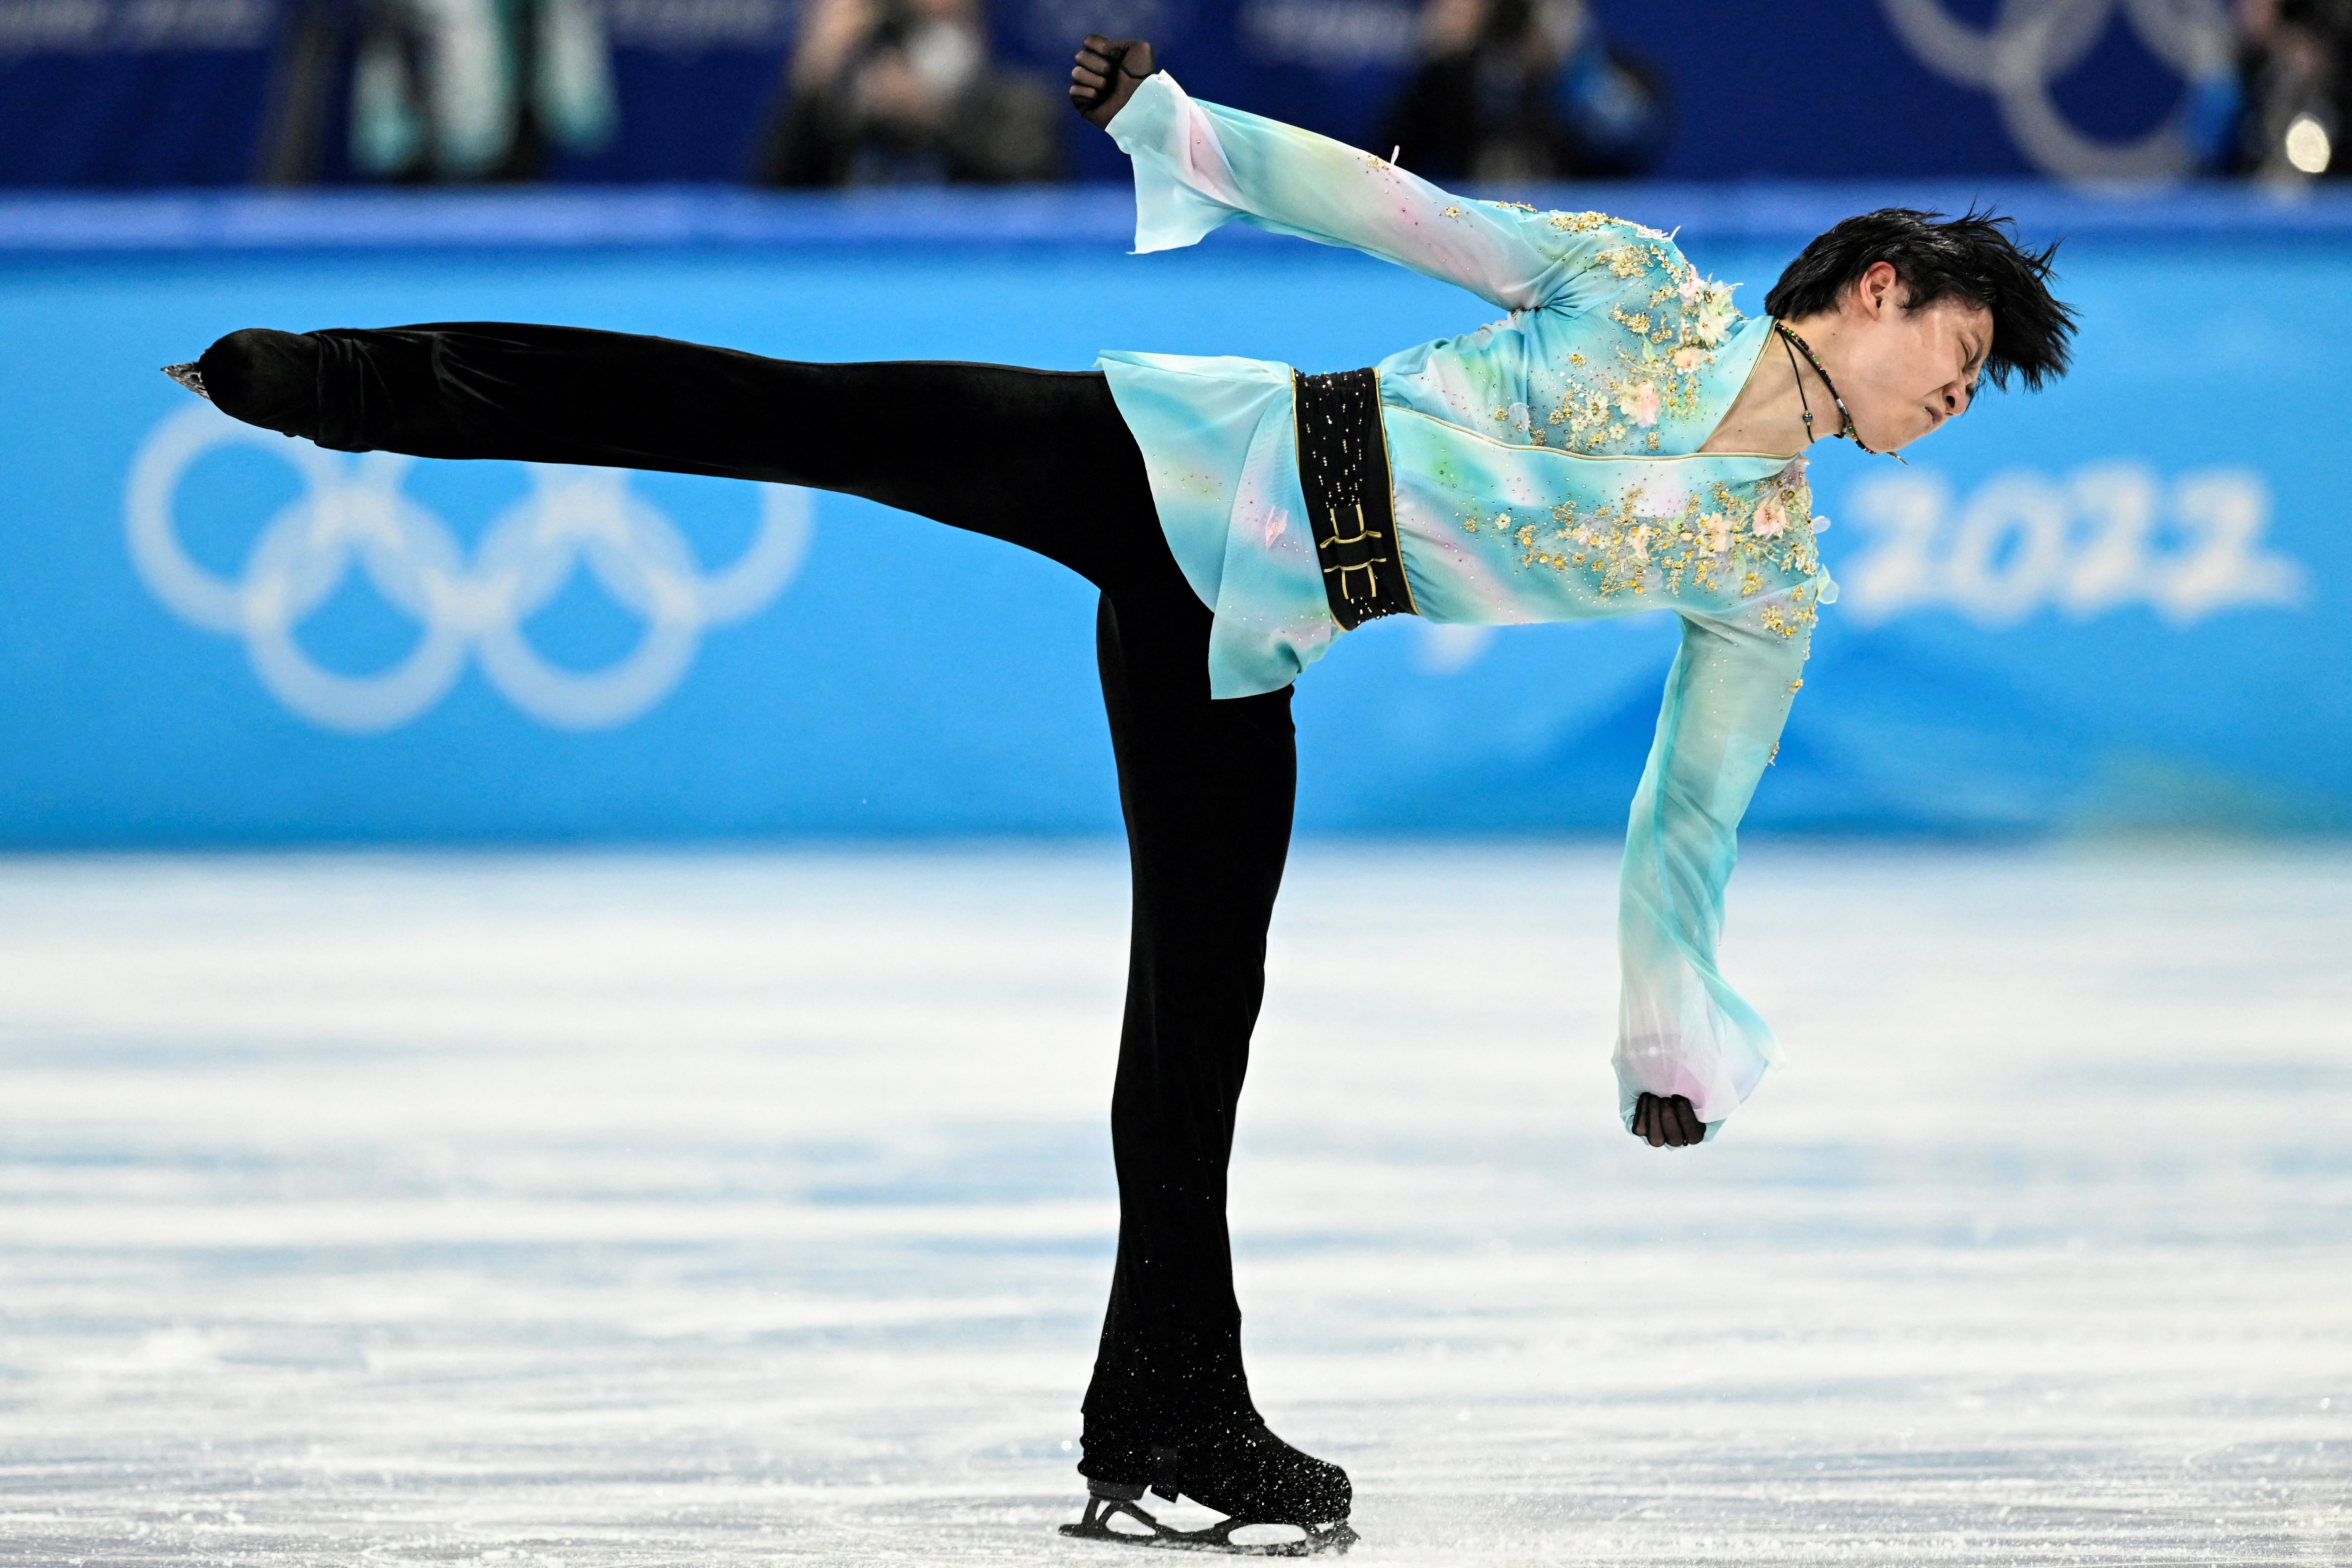 Hanyu competes in the men's singles free skating event on February 10.